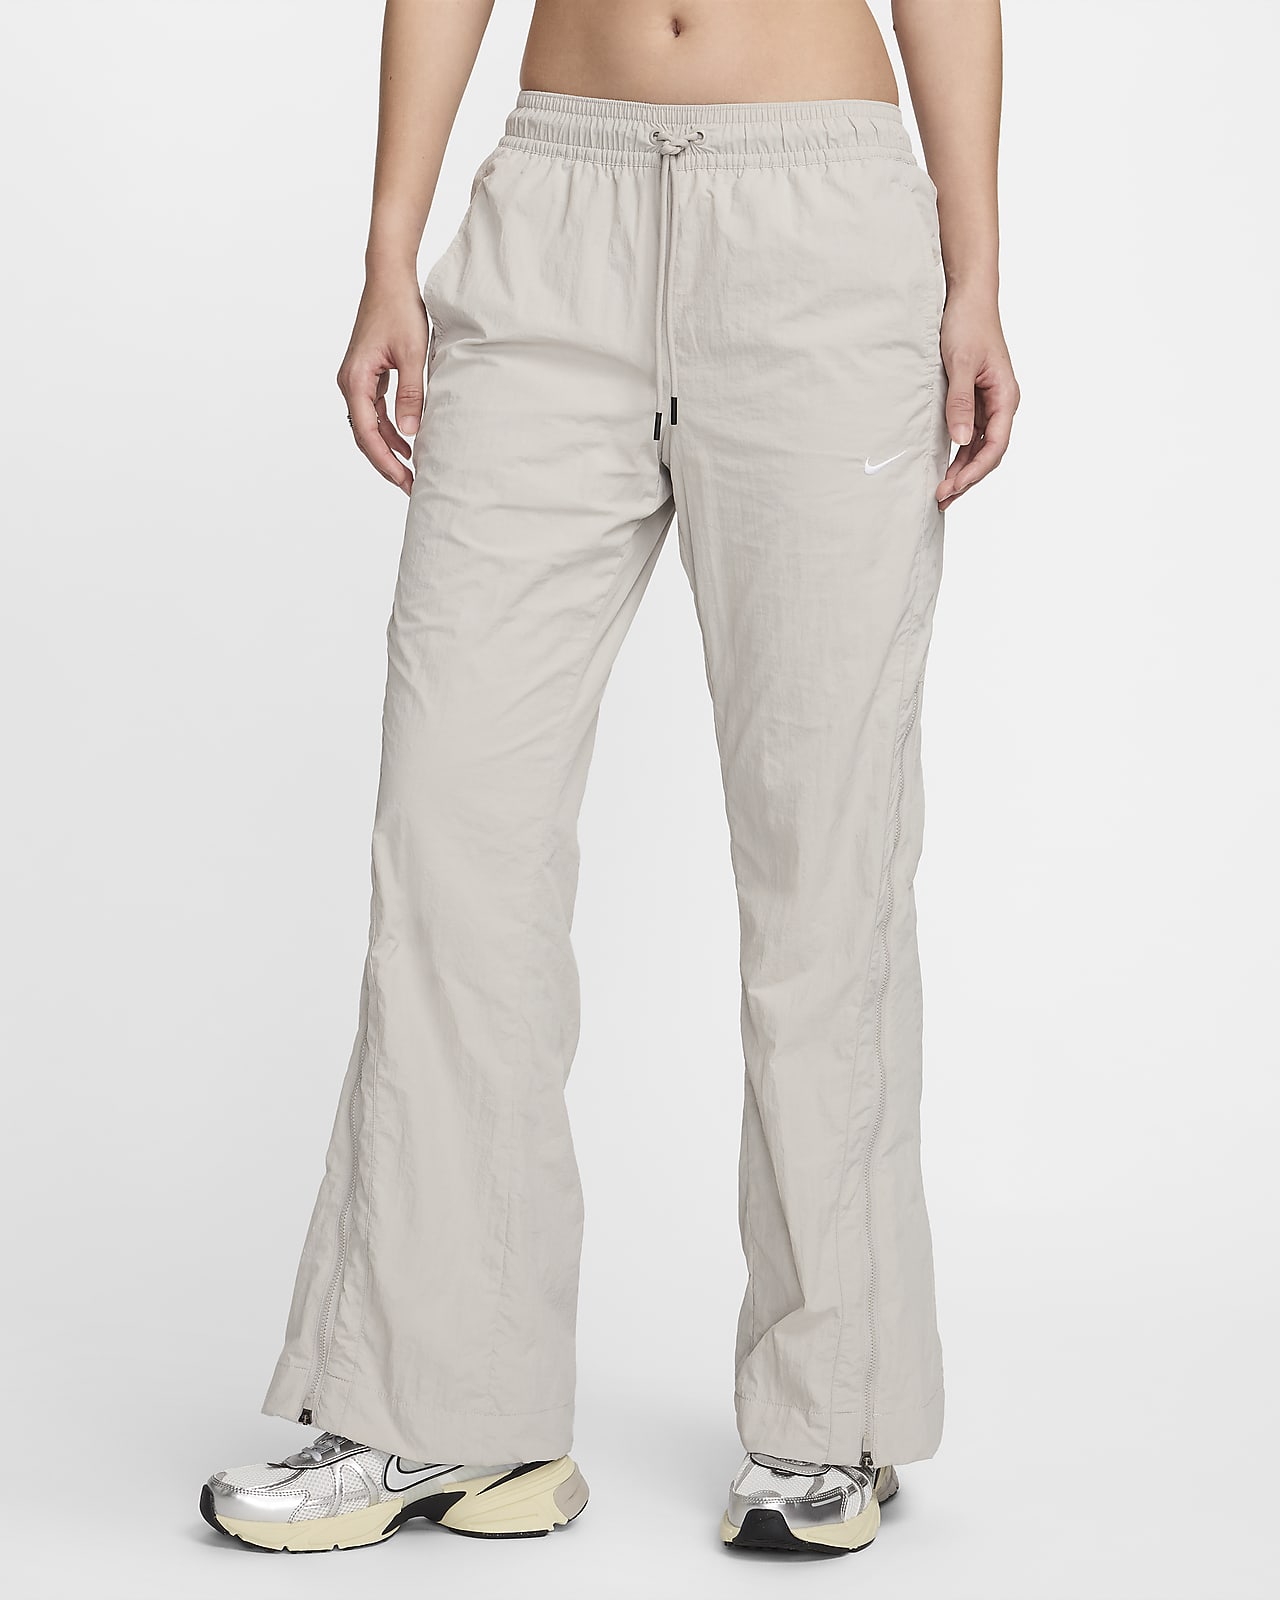 Nike Sportswear Collection Women's Mid-Rise Repel Zip Pants